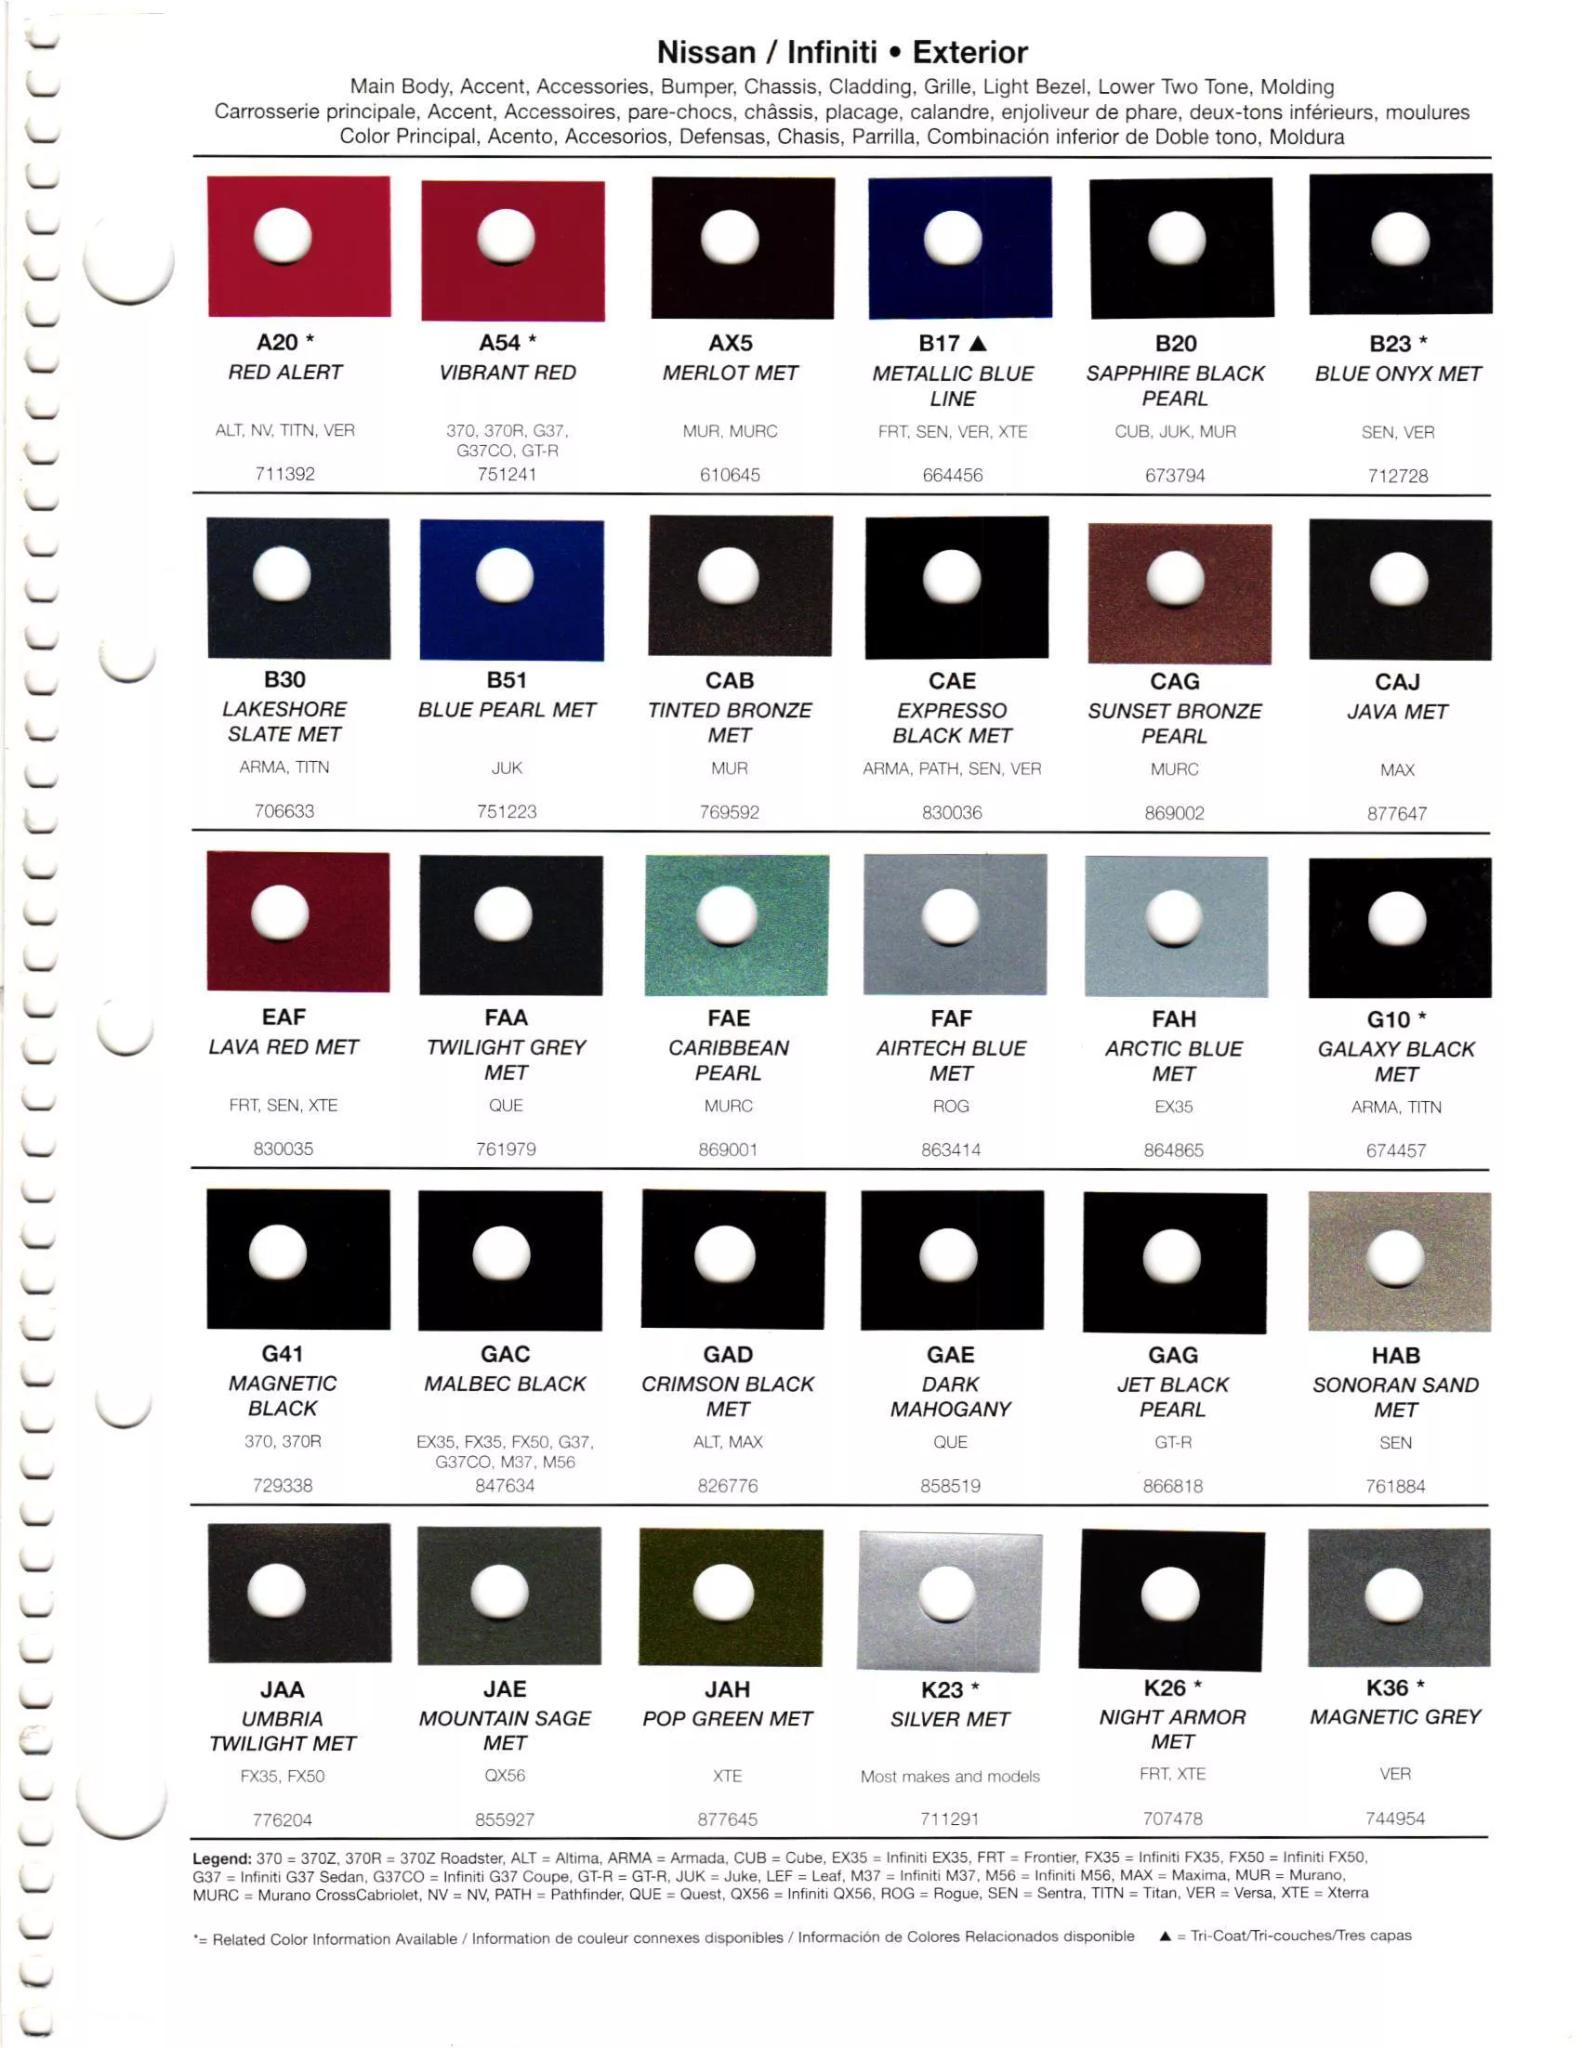 Paint codes, and their ordering stock numbers for their color on 2012 vehicles